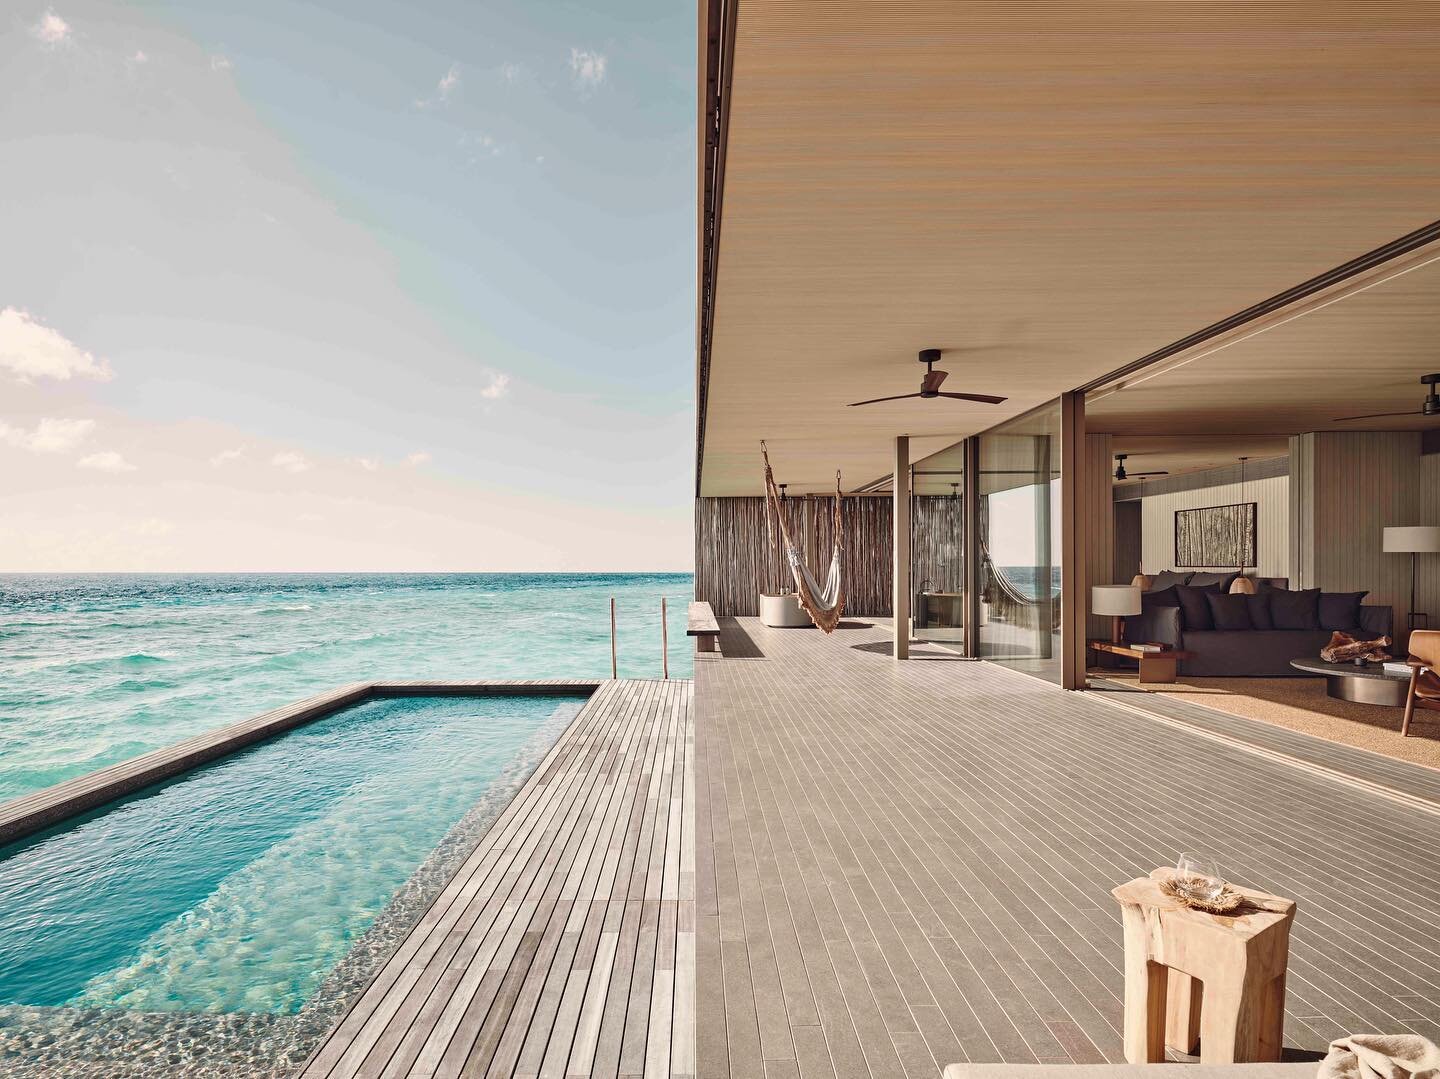 Overwater villa- but make it modern. @patinamaldives 

Message us to find out more about the complimentary perks we can add to your stay!

#alwayselsewhere #alwayselsewheretravel #luxurytravel #foratravel #takethetrip #travelgram #travelguide #travel